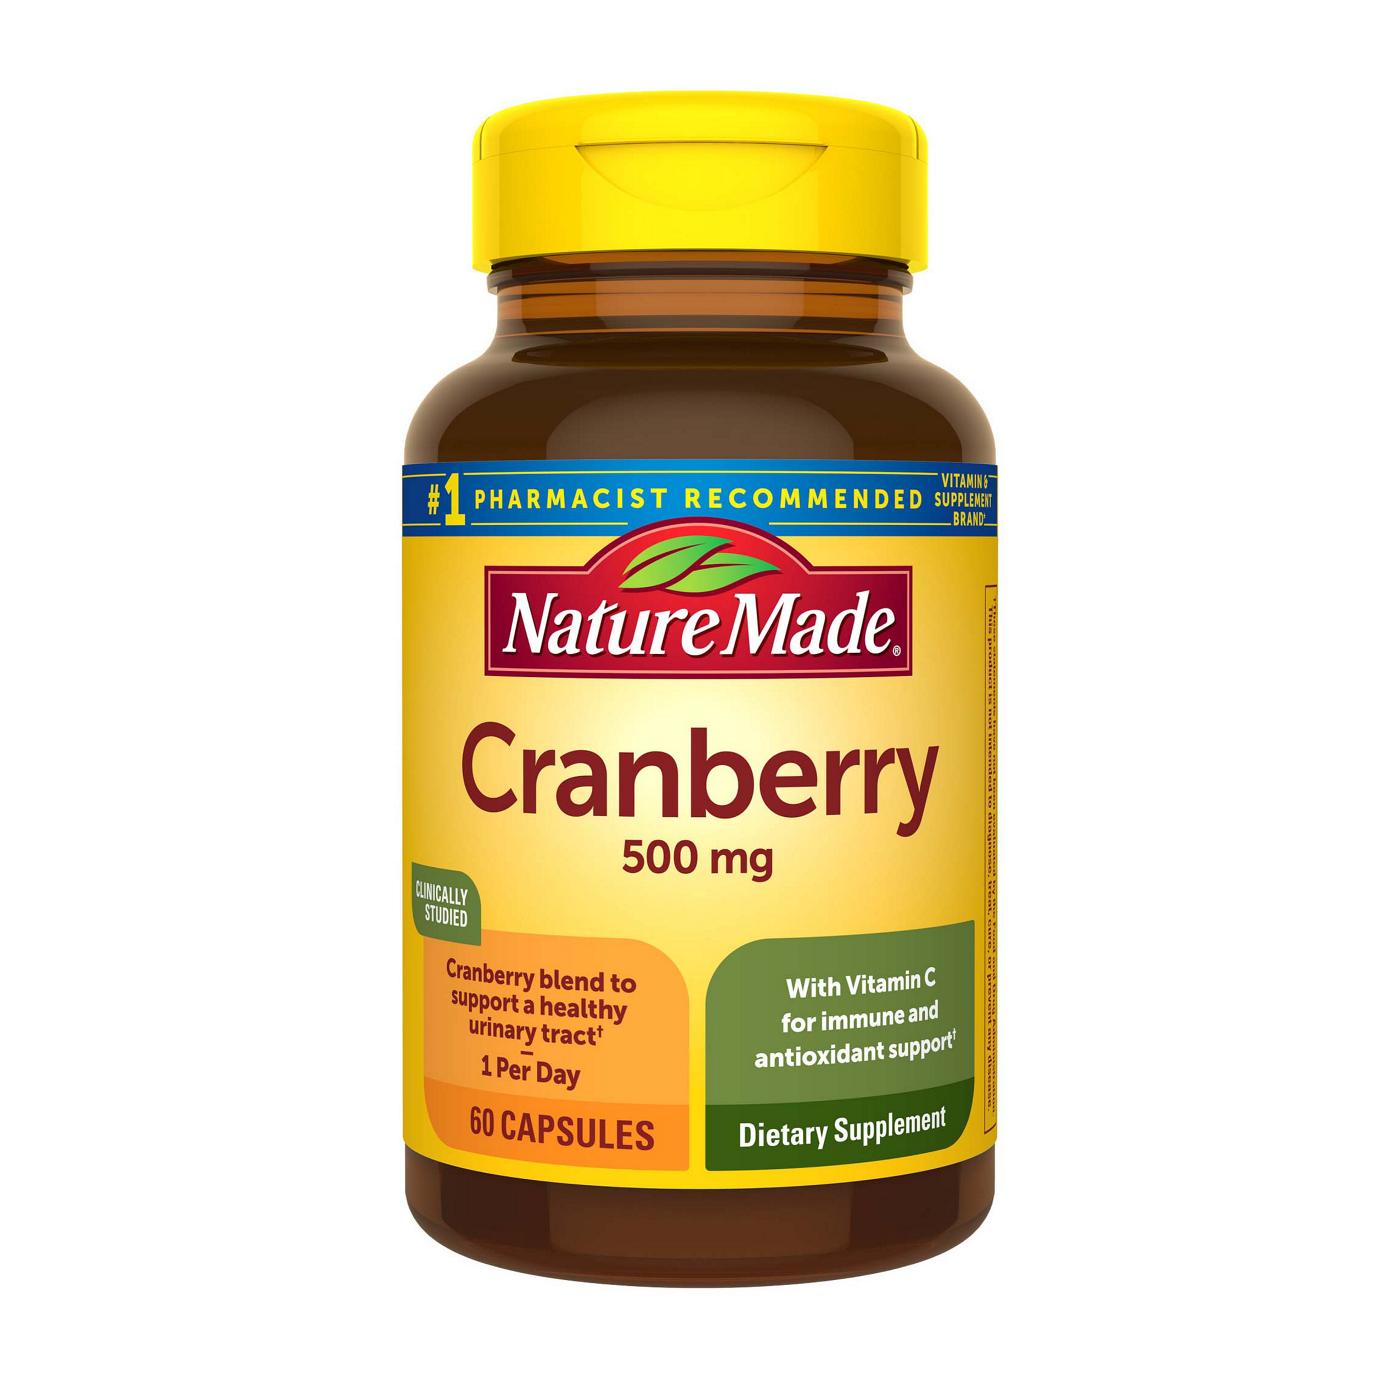 Nature Made Cranberry 500 mg Capsules; image 1 of 3